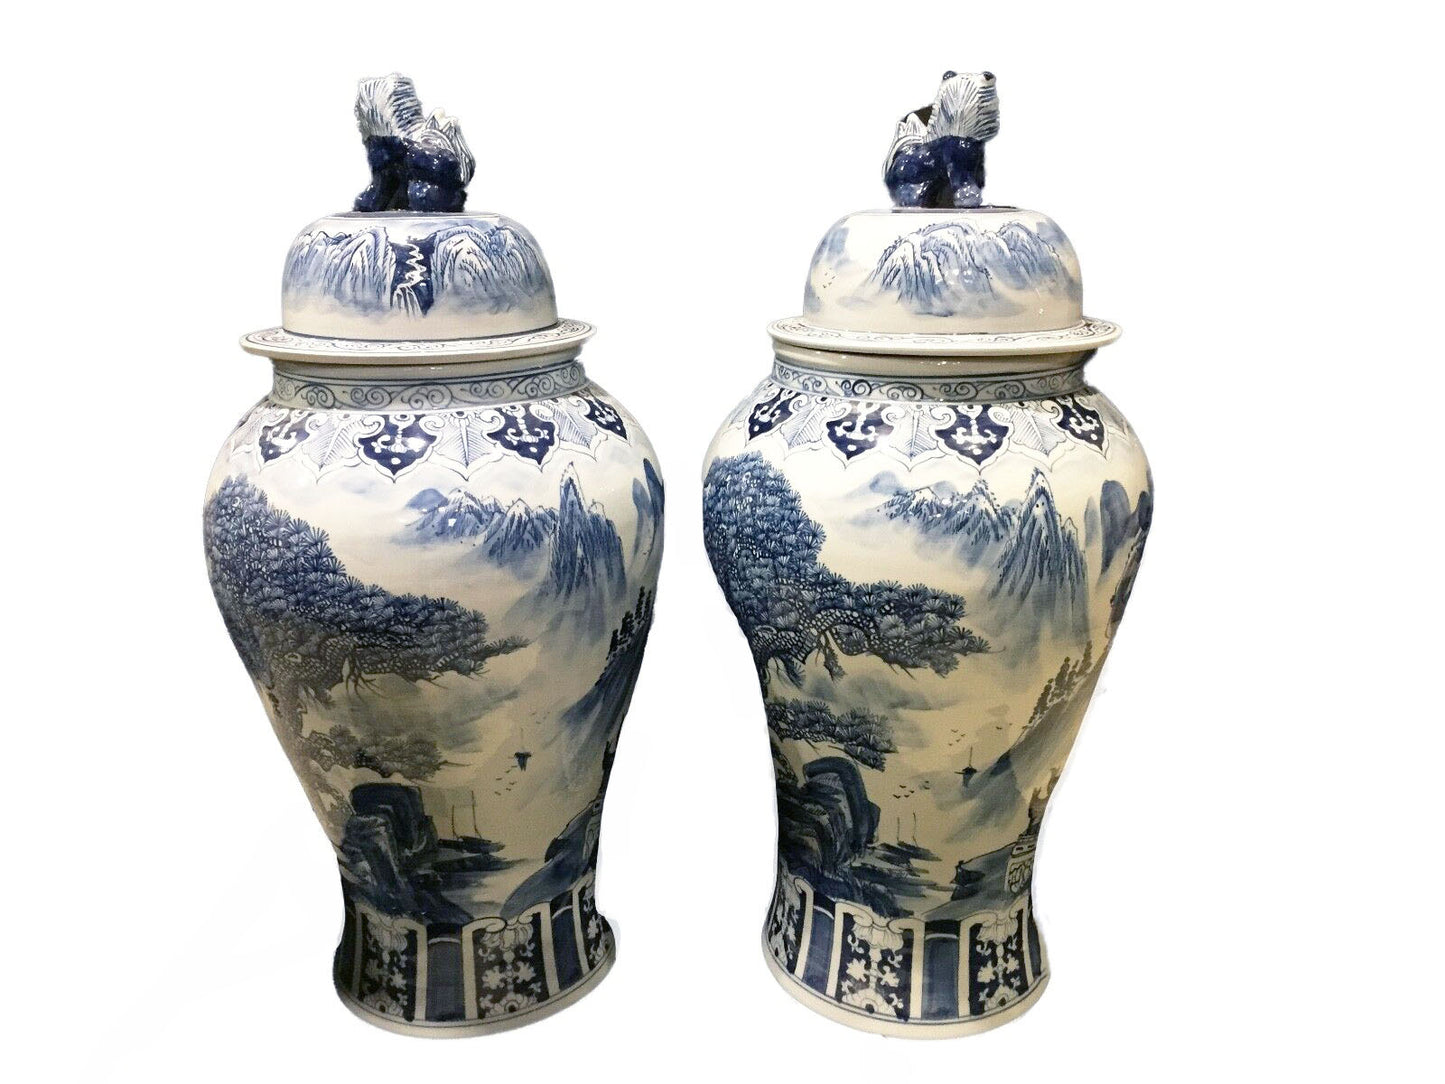 #954 Large Chinese B & W Porcelain Ginger Jars - a Pair 36 " H